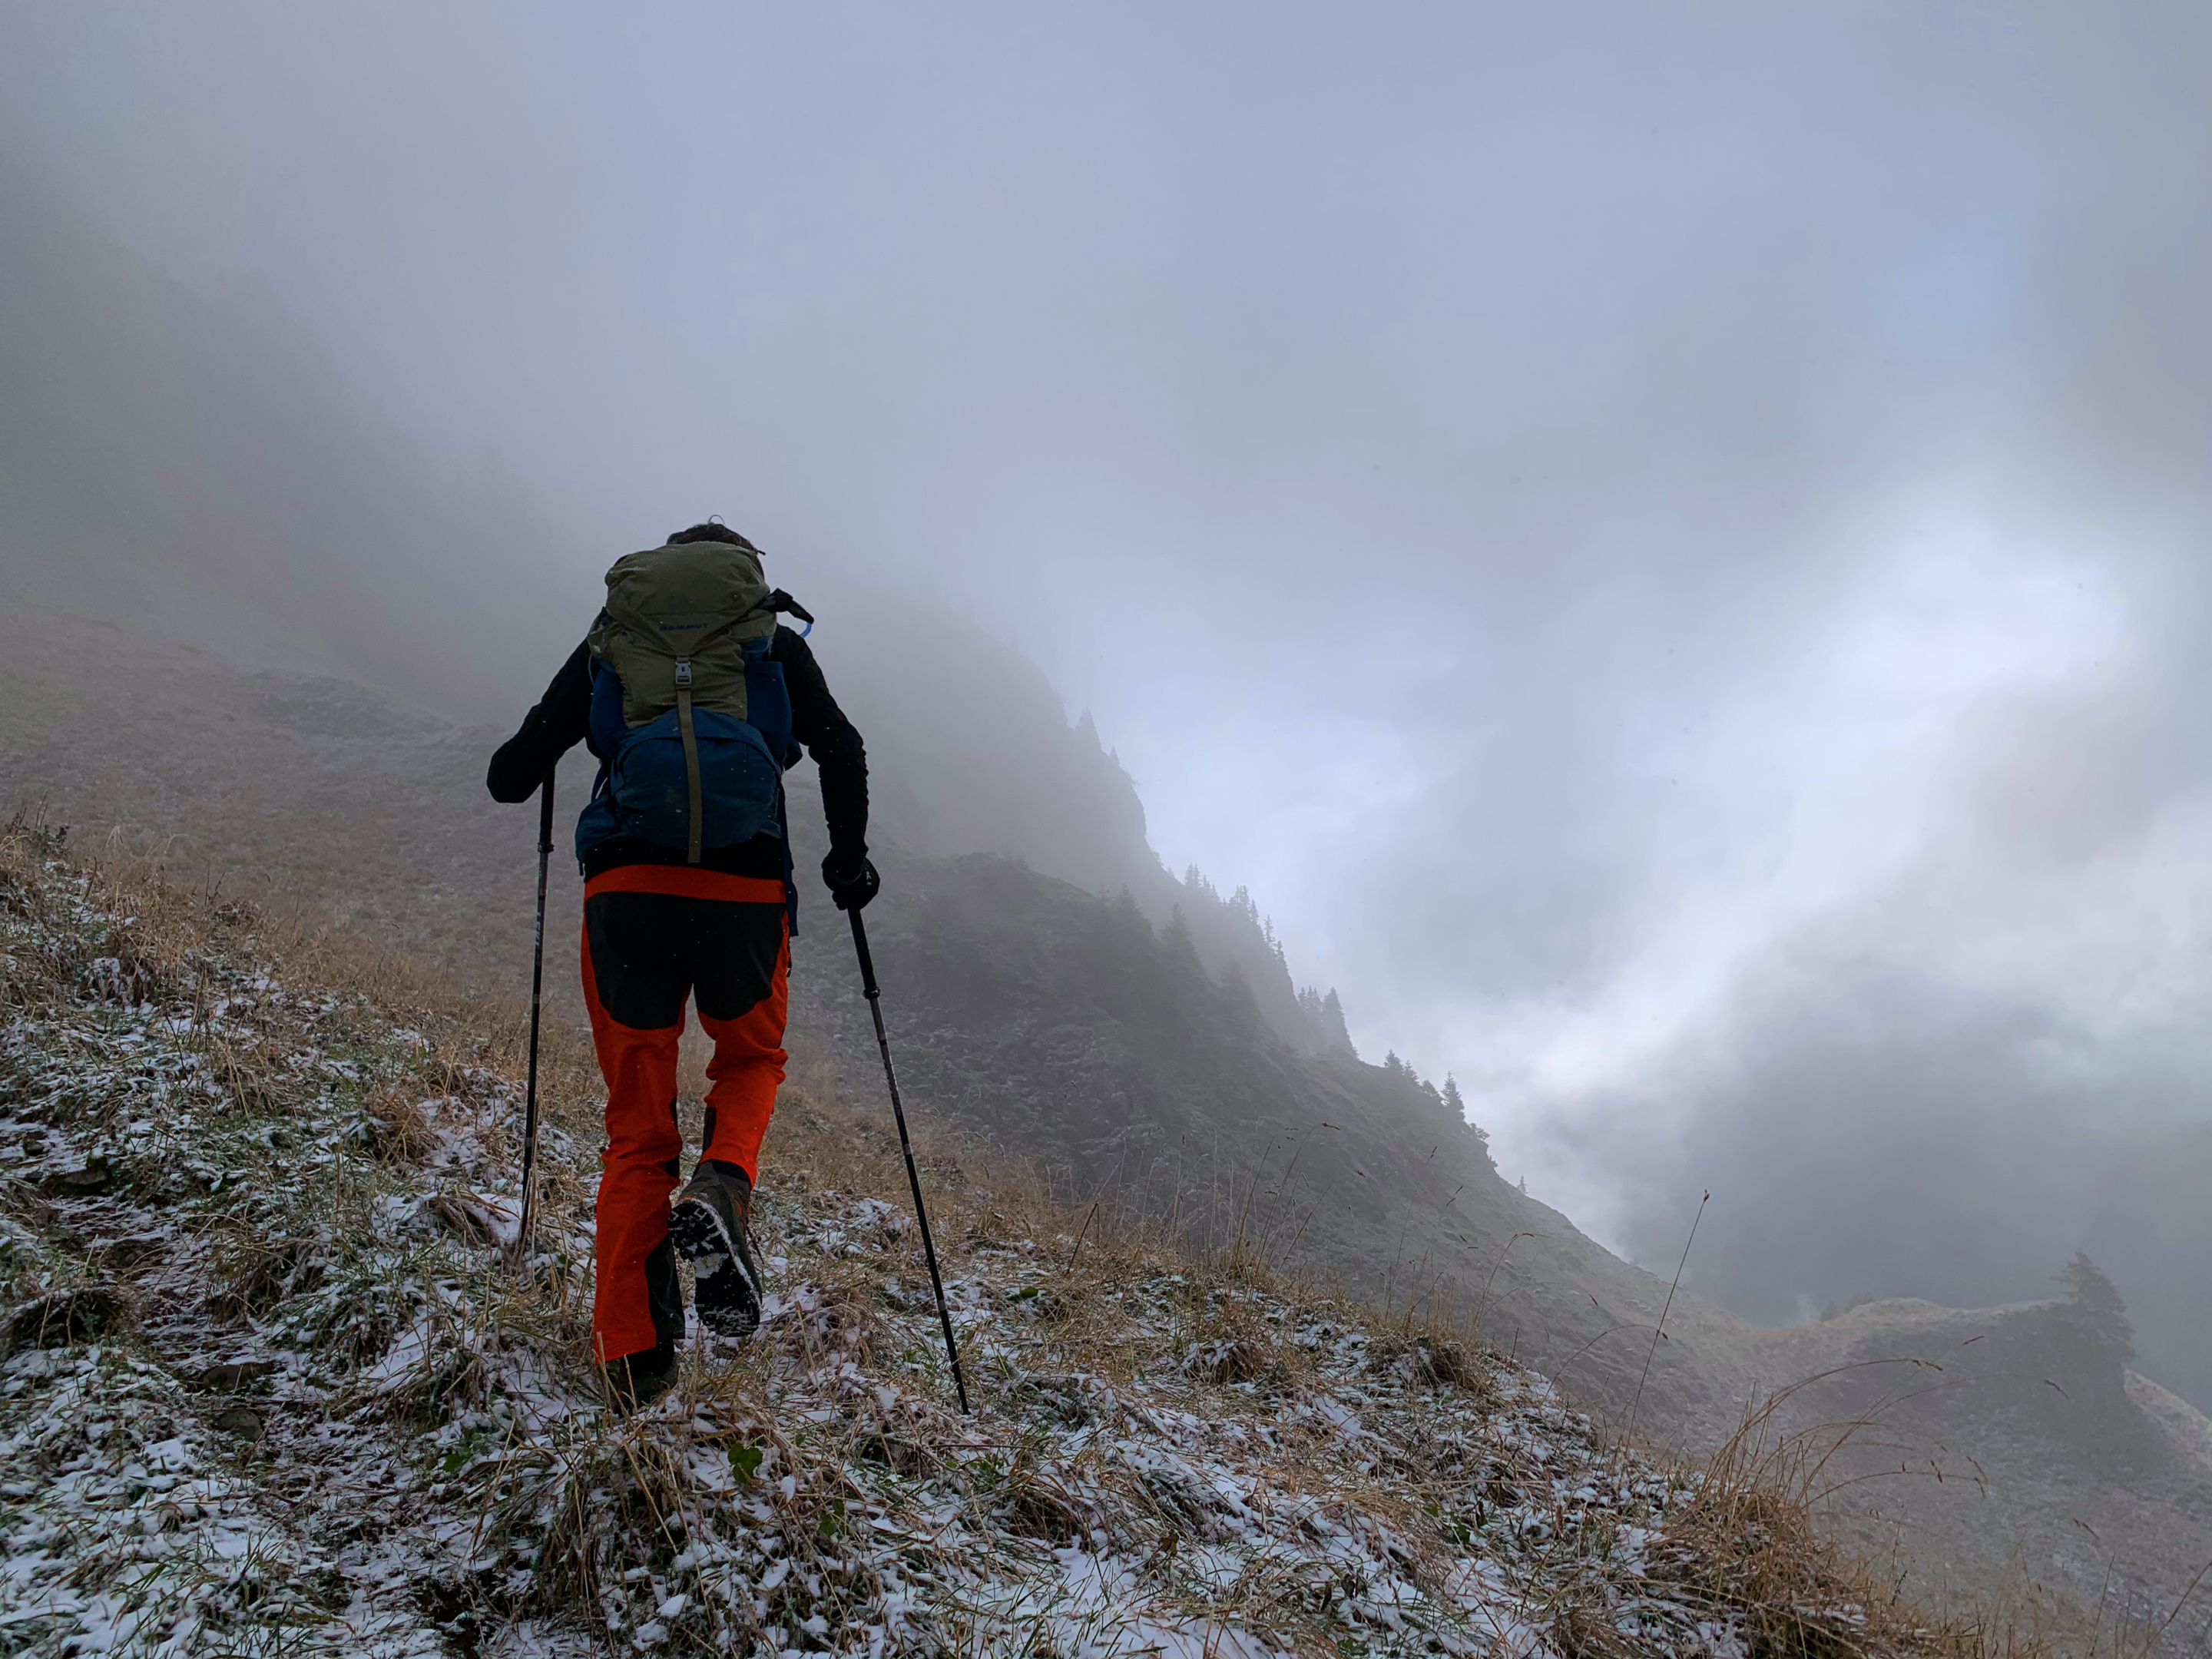 A hiker in misty conditions using walking poles to cross icy terrain. Photo by Stéphane Fellay on Unsplash